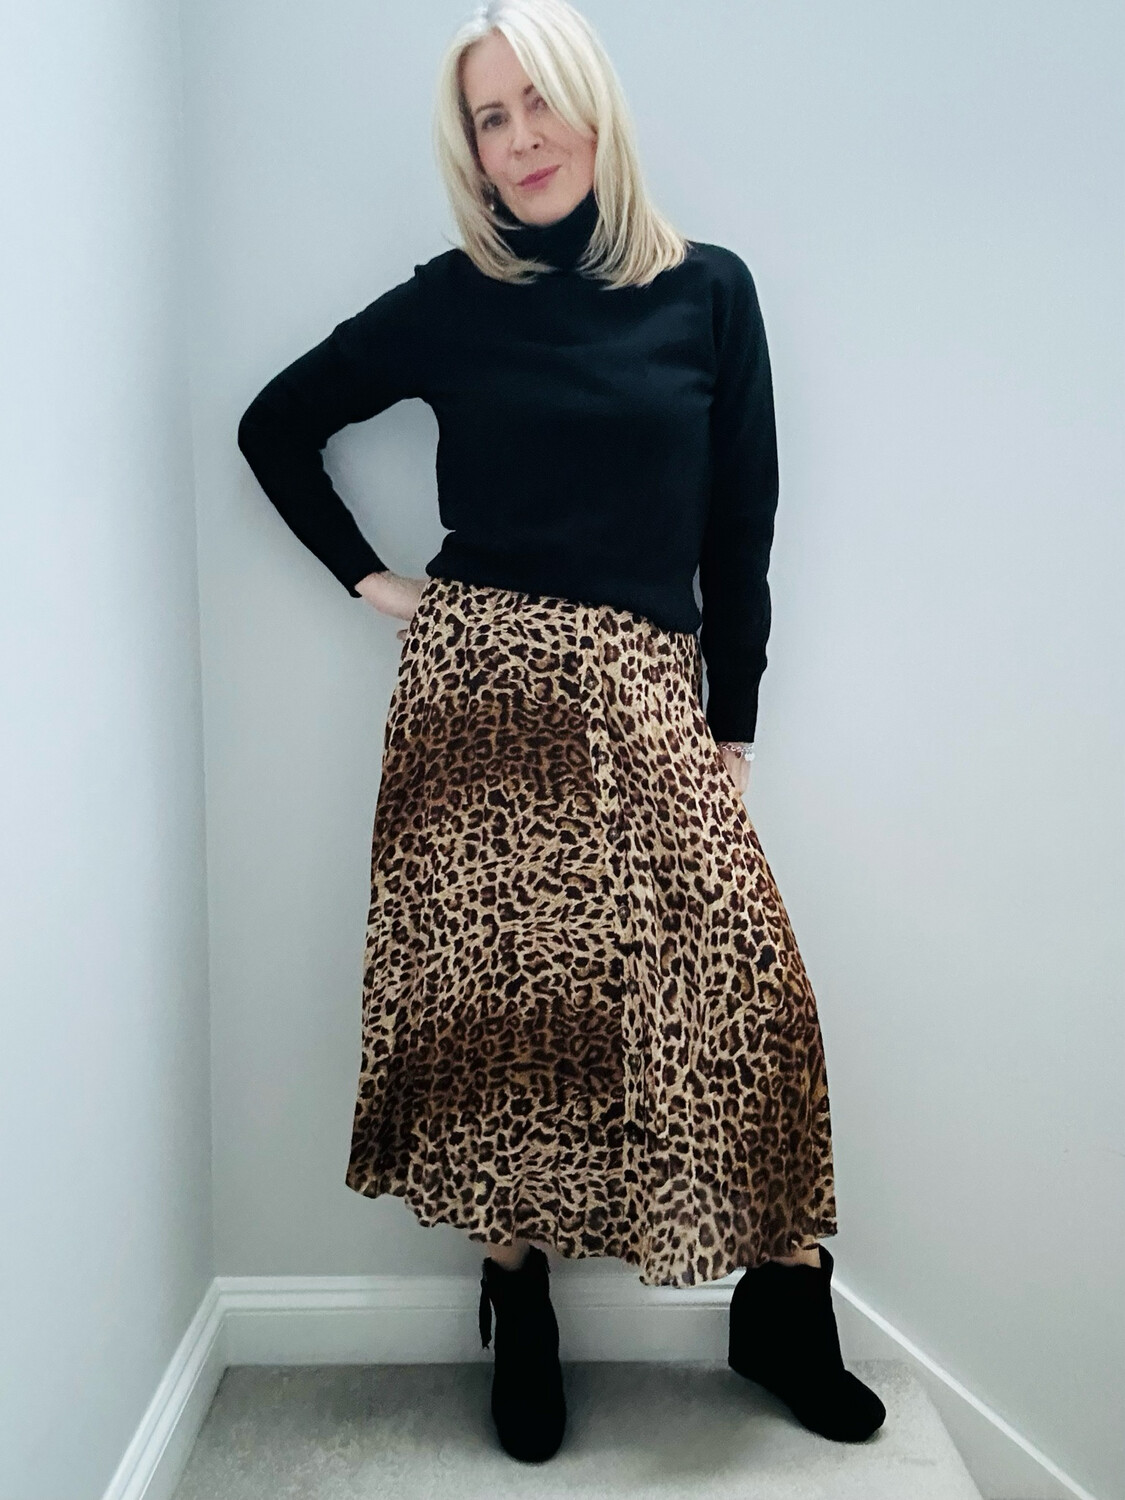 & Other Stories Leopard Skirt Size 8